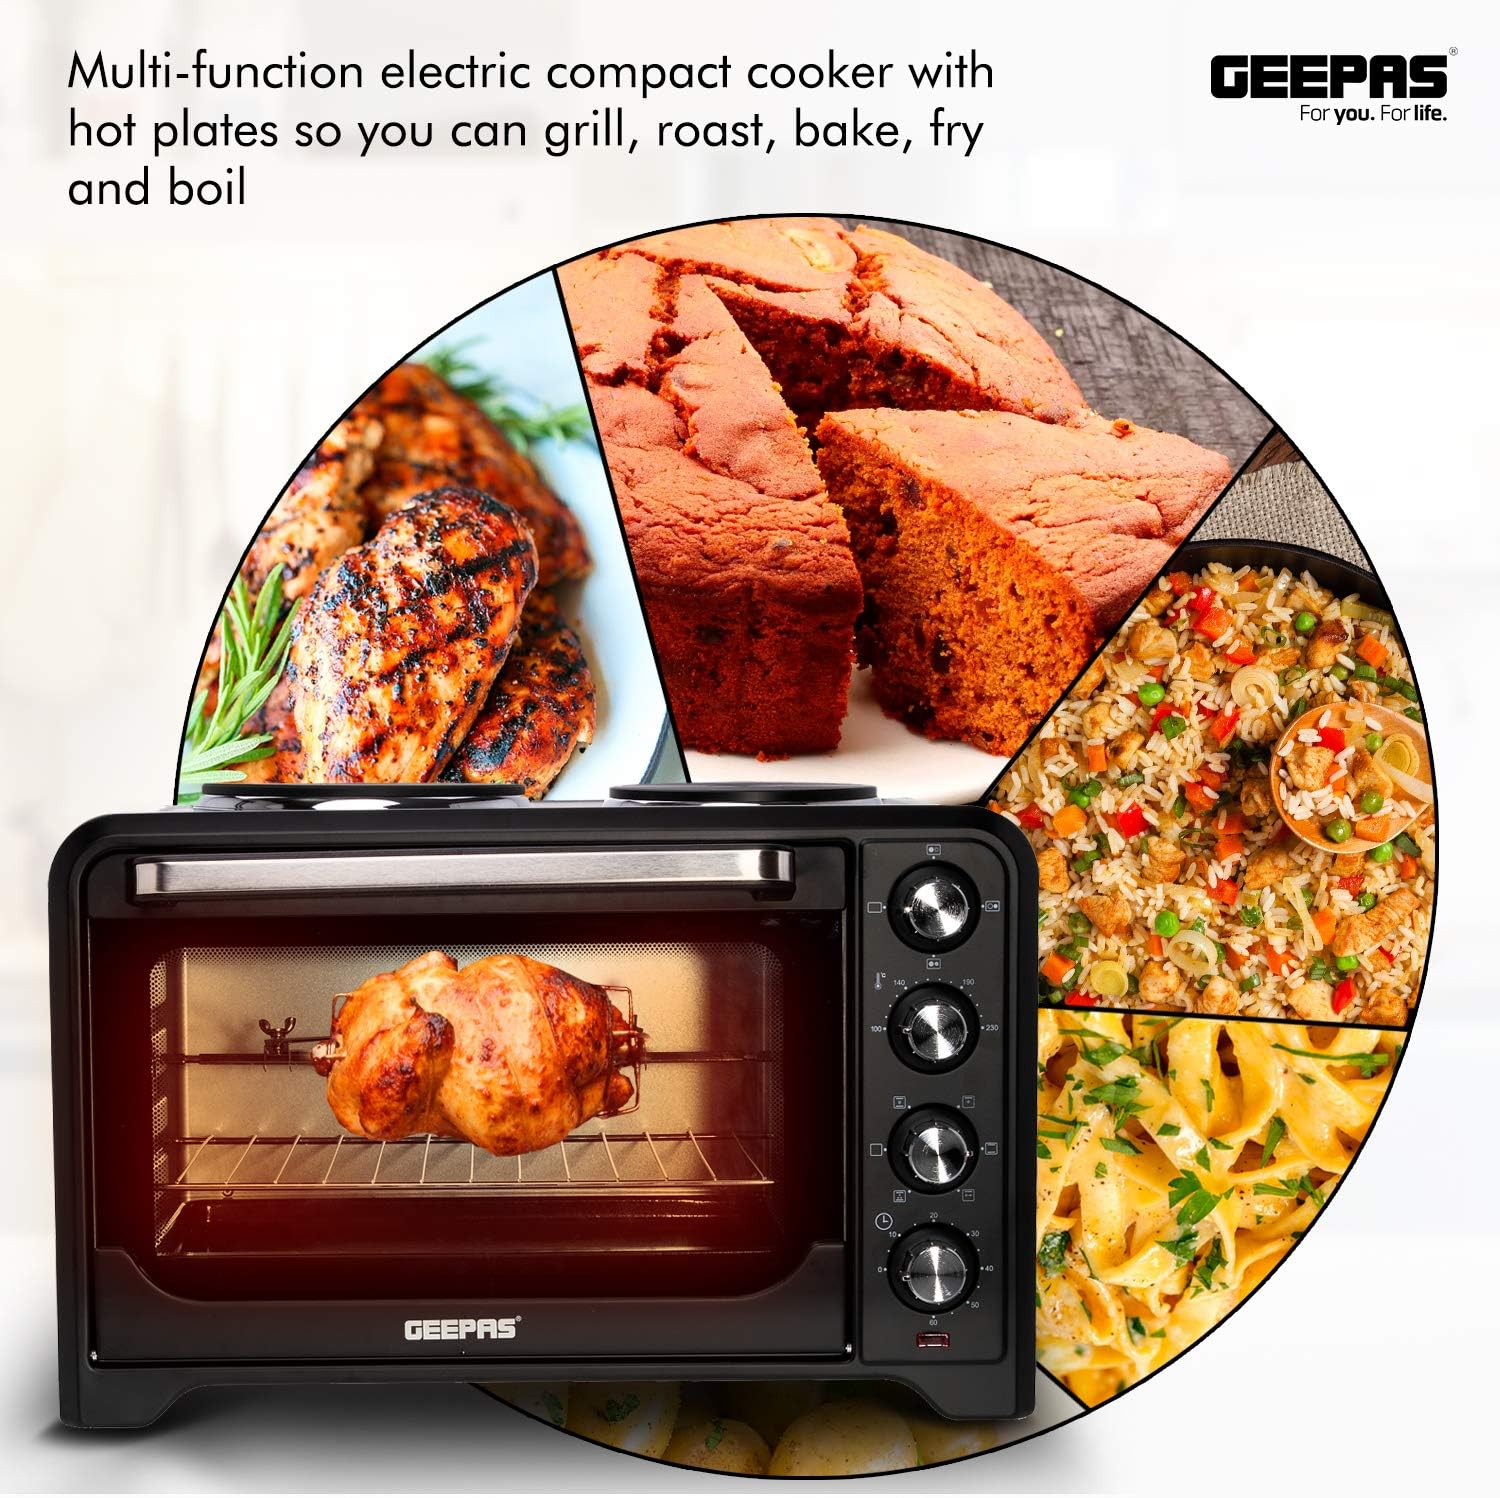 Geepas 38L Mini Oven Grill with Double Hotplate | 1600W 60 Minutes Timer | Rotisserie Function 6 Selectors for Baking Grilling | 5 Accessories Included Convection Function – 2 Years Warranty [Energy Class A+]